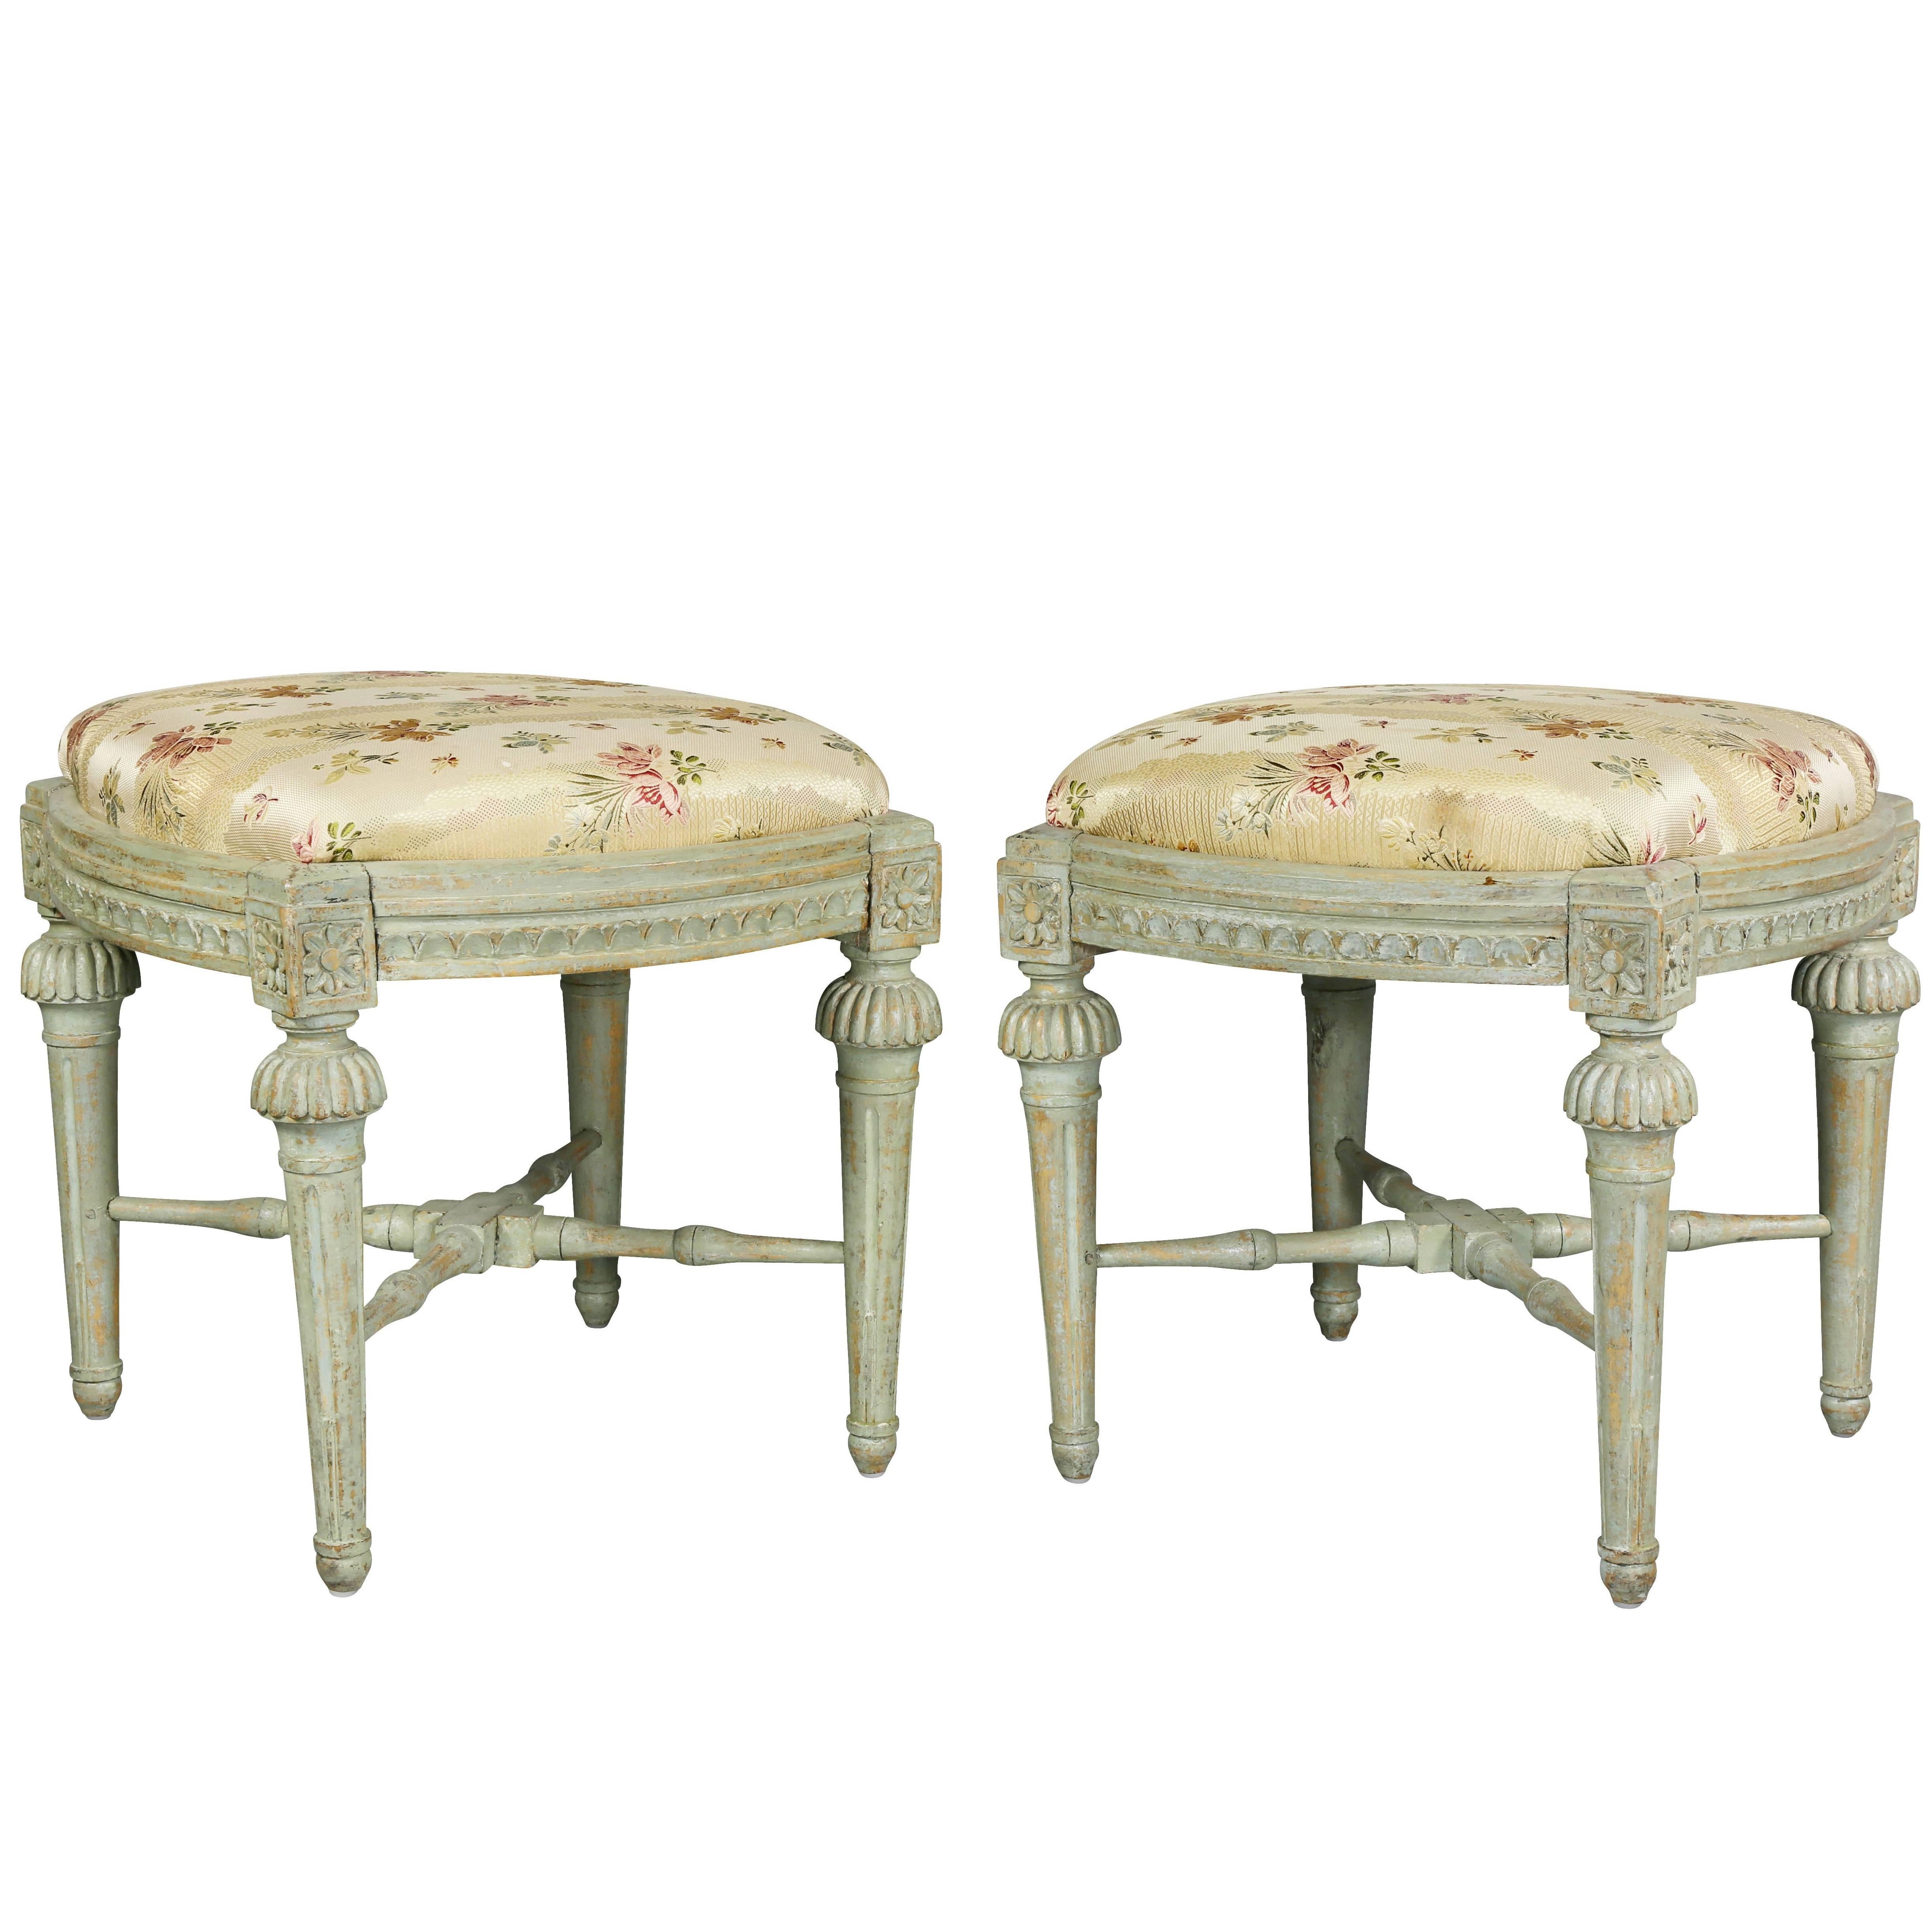 Pair of Swedish Neoclassic Painted Footstools